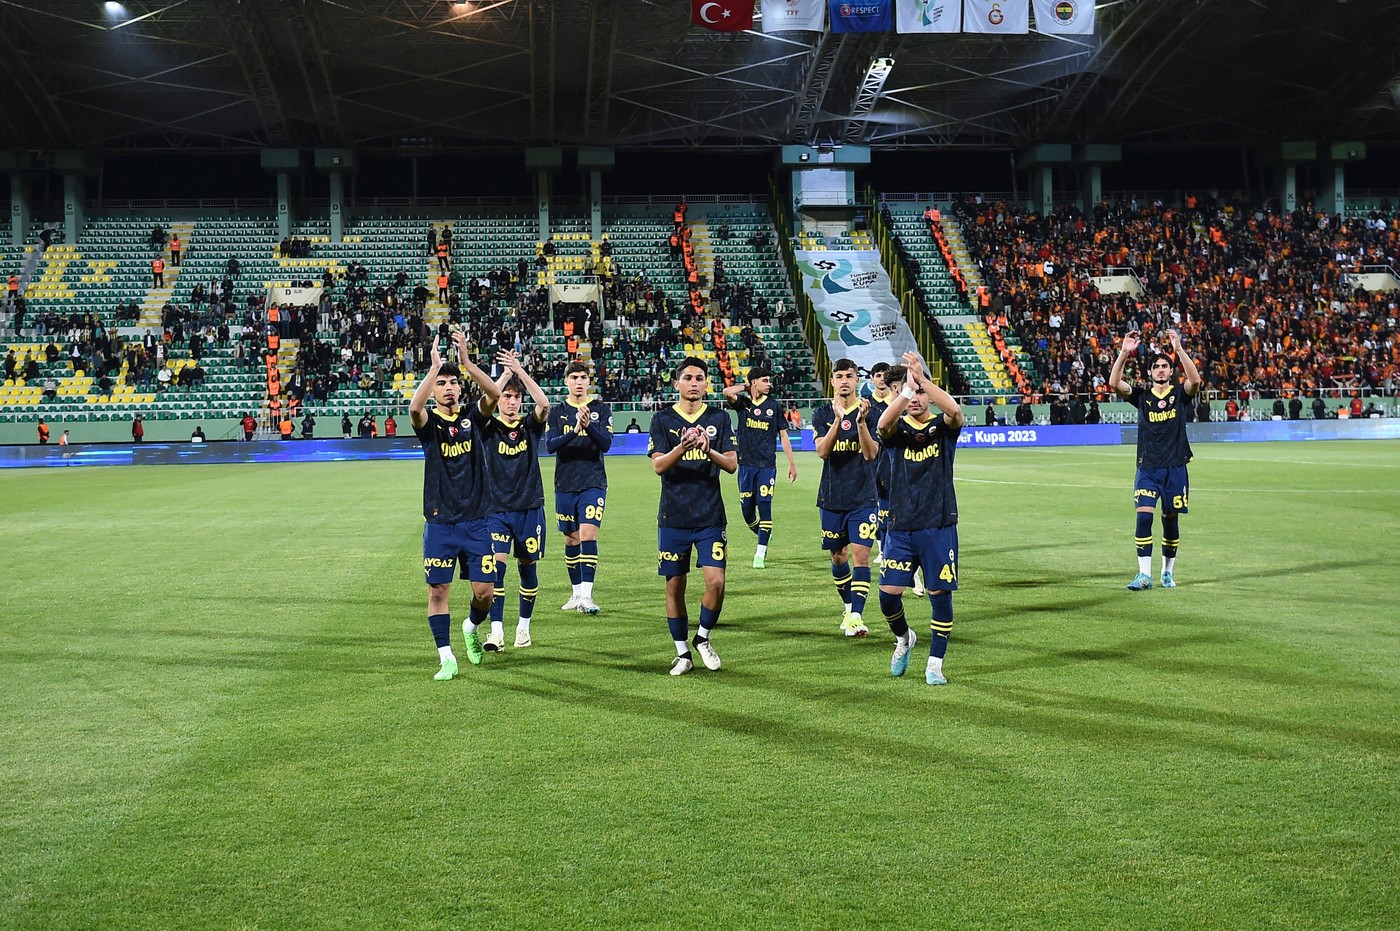 Fenerbahce Sports Club, protesting the Turkish Football Federation, fielded a youth team for the Turkish Super Cup match. In the 1st minute of the match, after Galatasaray scored a goal, the young Fenerbahce players did not return for the kickoff and went to the dressing room. Meanwhile, Fenerbahce President Ali Koc and Fenerbahce executives in the stands applauded their young team and escorted them to the dressing room, protesting against the Turkish Football Federation. Subsequently, the match was suspended by the referee. during the Turkish SuperCup match between Fenerbahce and Galatasaray at Sanliurfa Stadium in Sanliurfa , Turkey on April 07 , 2024.  Photo by Sanliurfa TURKEY Sanliurfa TURKEY Copyright: xx FBahce-GSaray_070424 95,Image: 863226316, License: Rights-managed, Restrictions: PUBLICATIONxNOTxINxTUR, Credit images as "Profimedia/ IMAGO", Model Release: no, Credit line: Seskimphoto / imago sportfotodienst / Profimedia